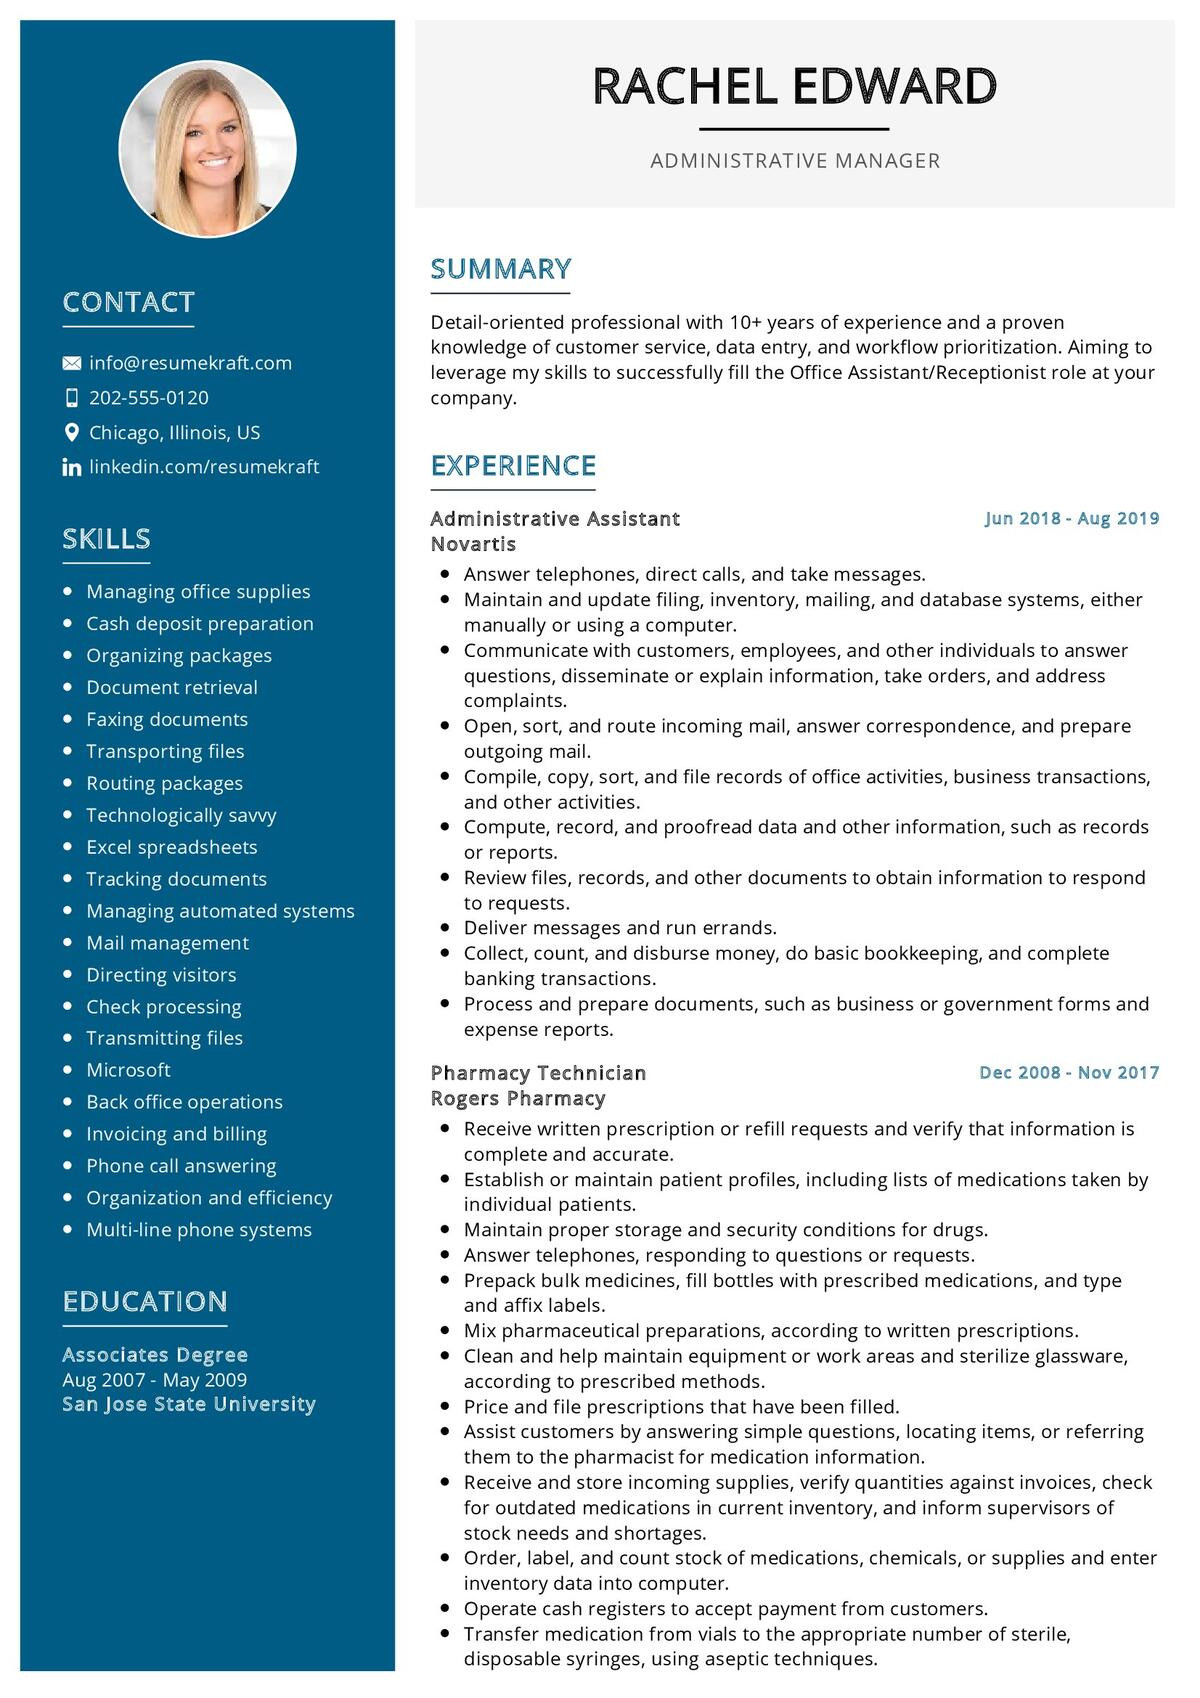 Sample Sterile Processing Manager Resume Examples Administrative Manager Resume Sample 2021 Writing Guide & Tips …